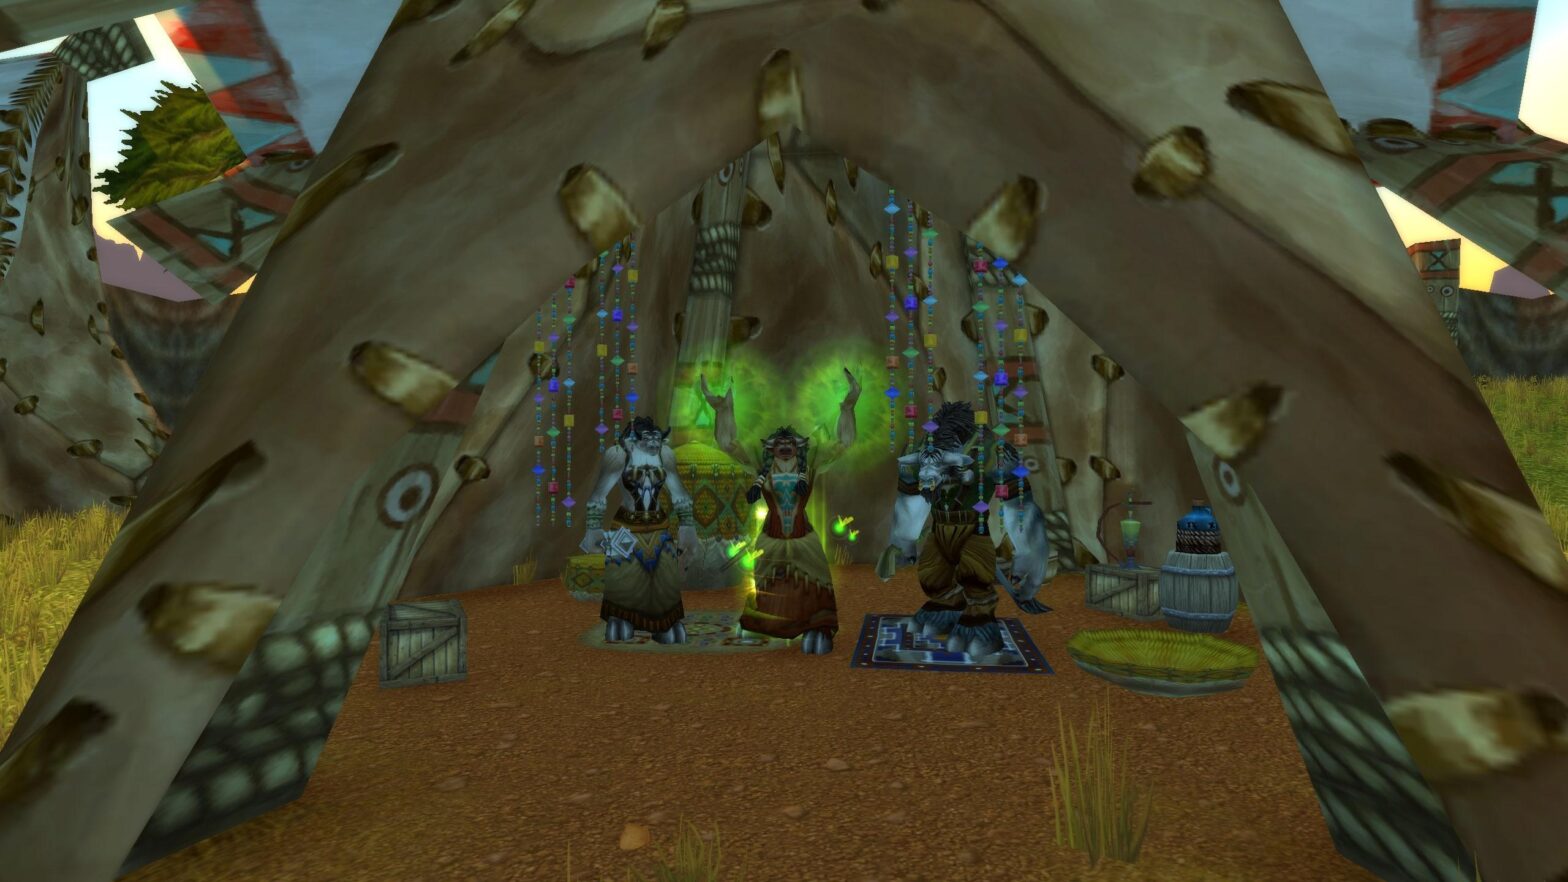 Overview of Durotar Supplies in WoW Season of Discovery